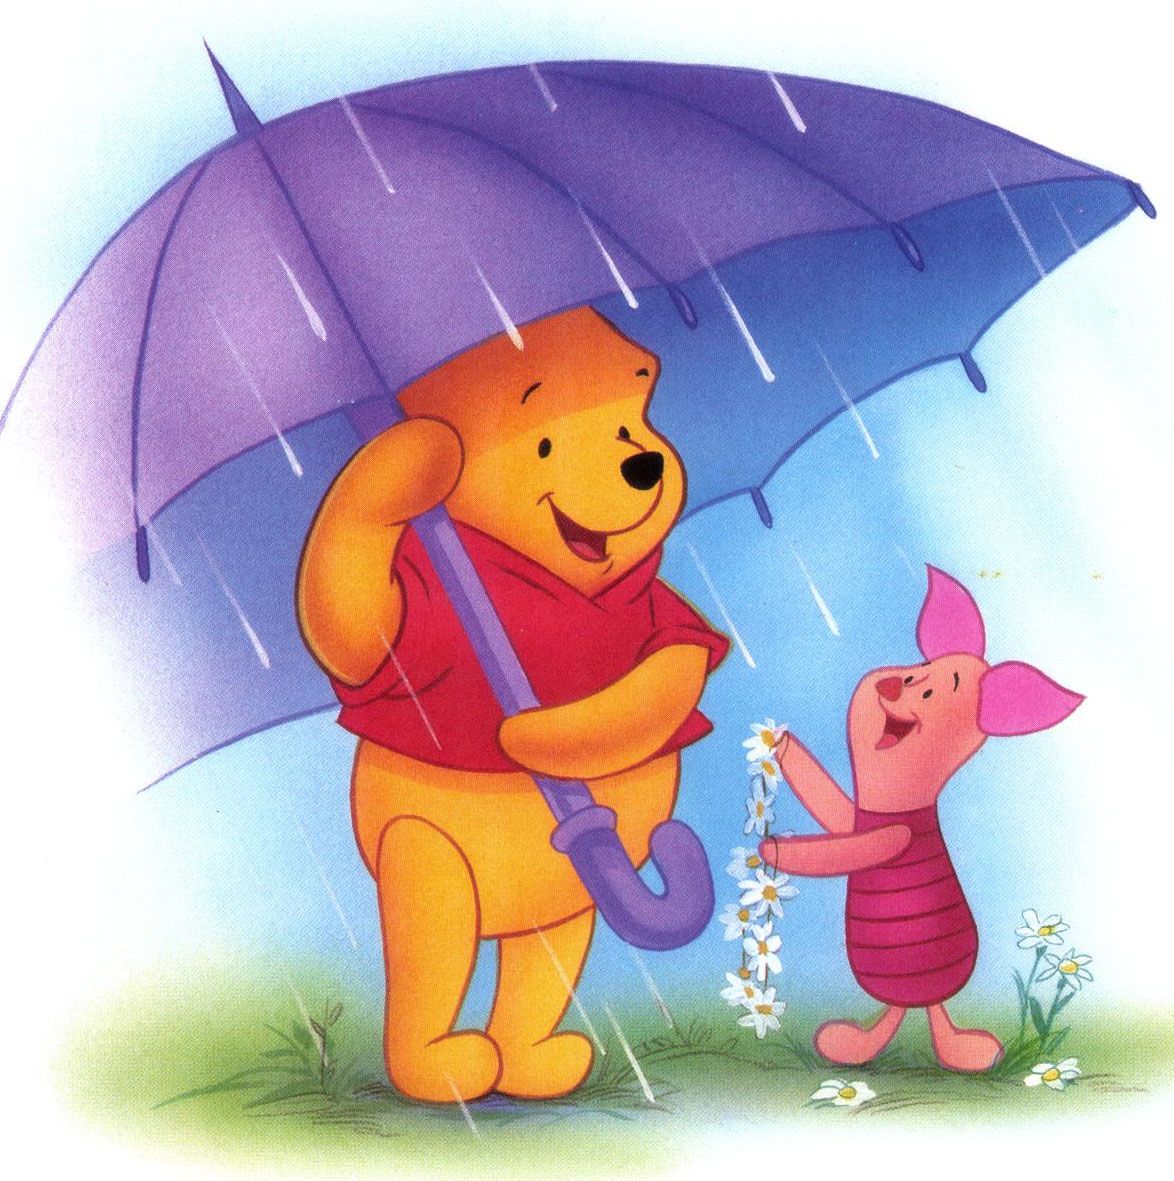 Pooh Pictures: 50 Pooh Bear jpeg Pictures by Disney for download ...